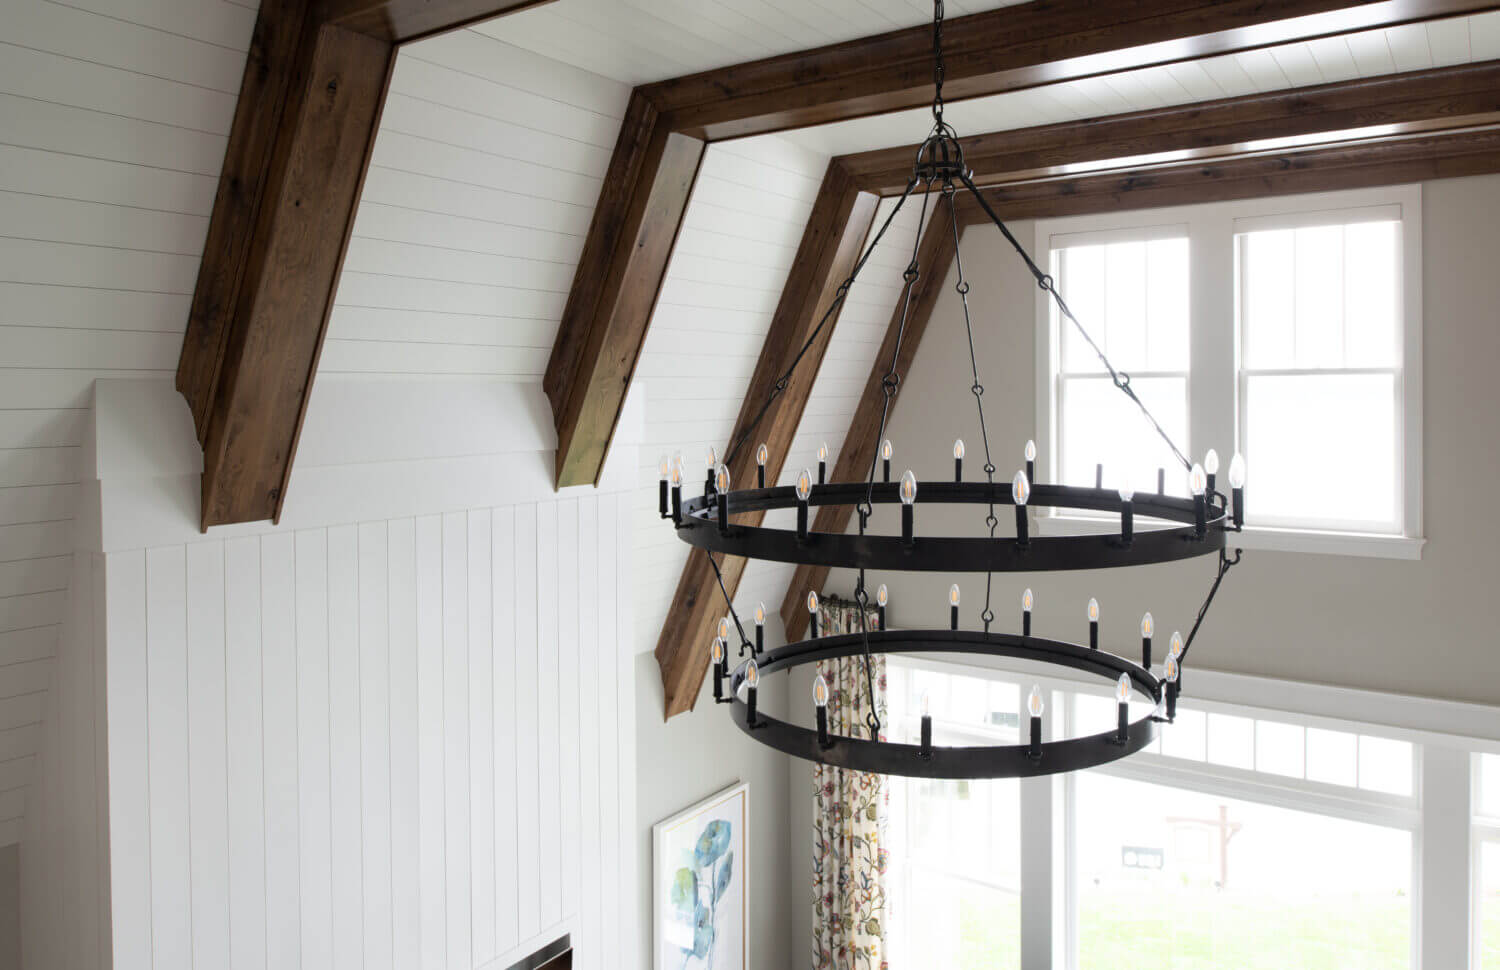 A close up unique vaulted ceilings with large beams and shiplap detail with a large black chandelier light fixture.